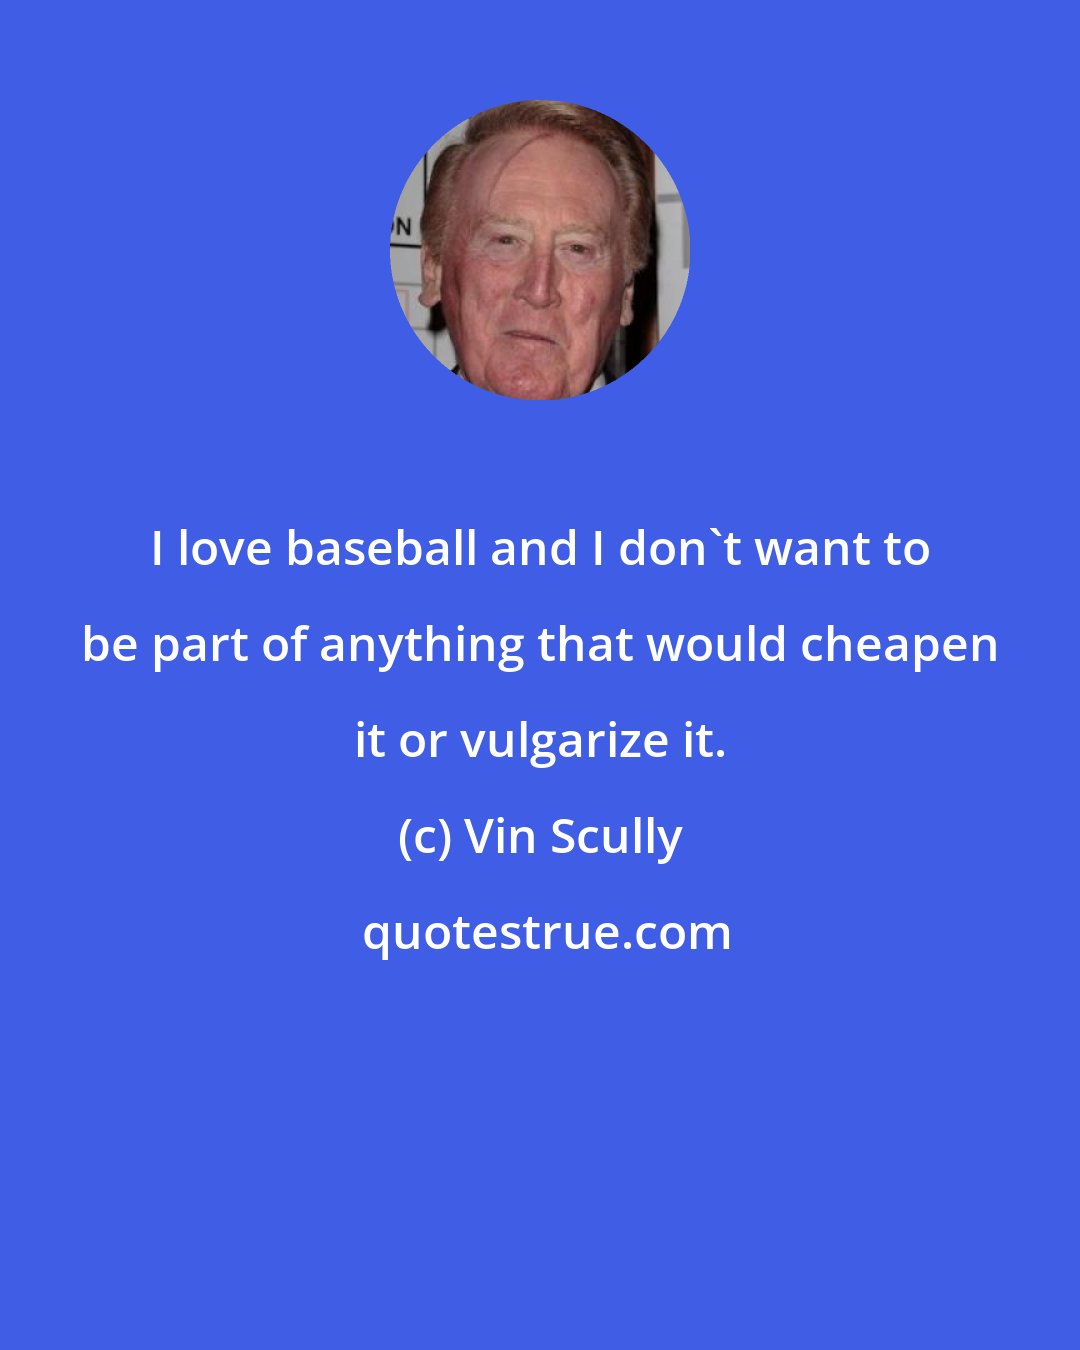 Vin Scully: I love baseball and I don't want to be part of anything that would cheapen it or vulgarize it.